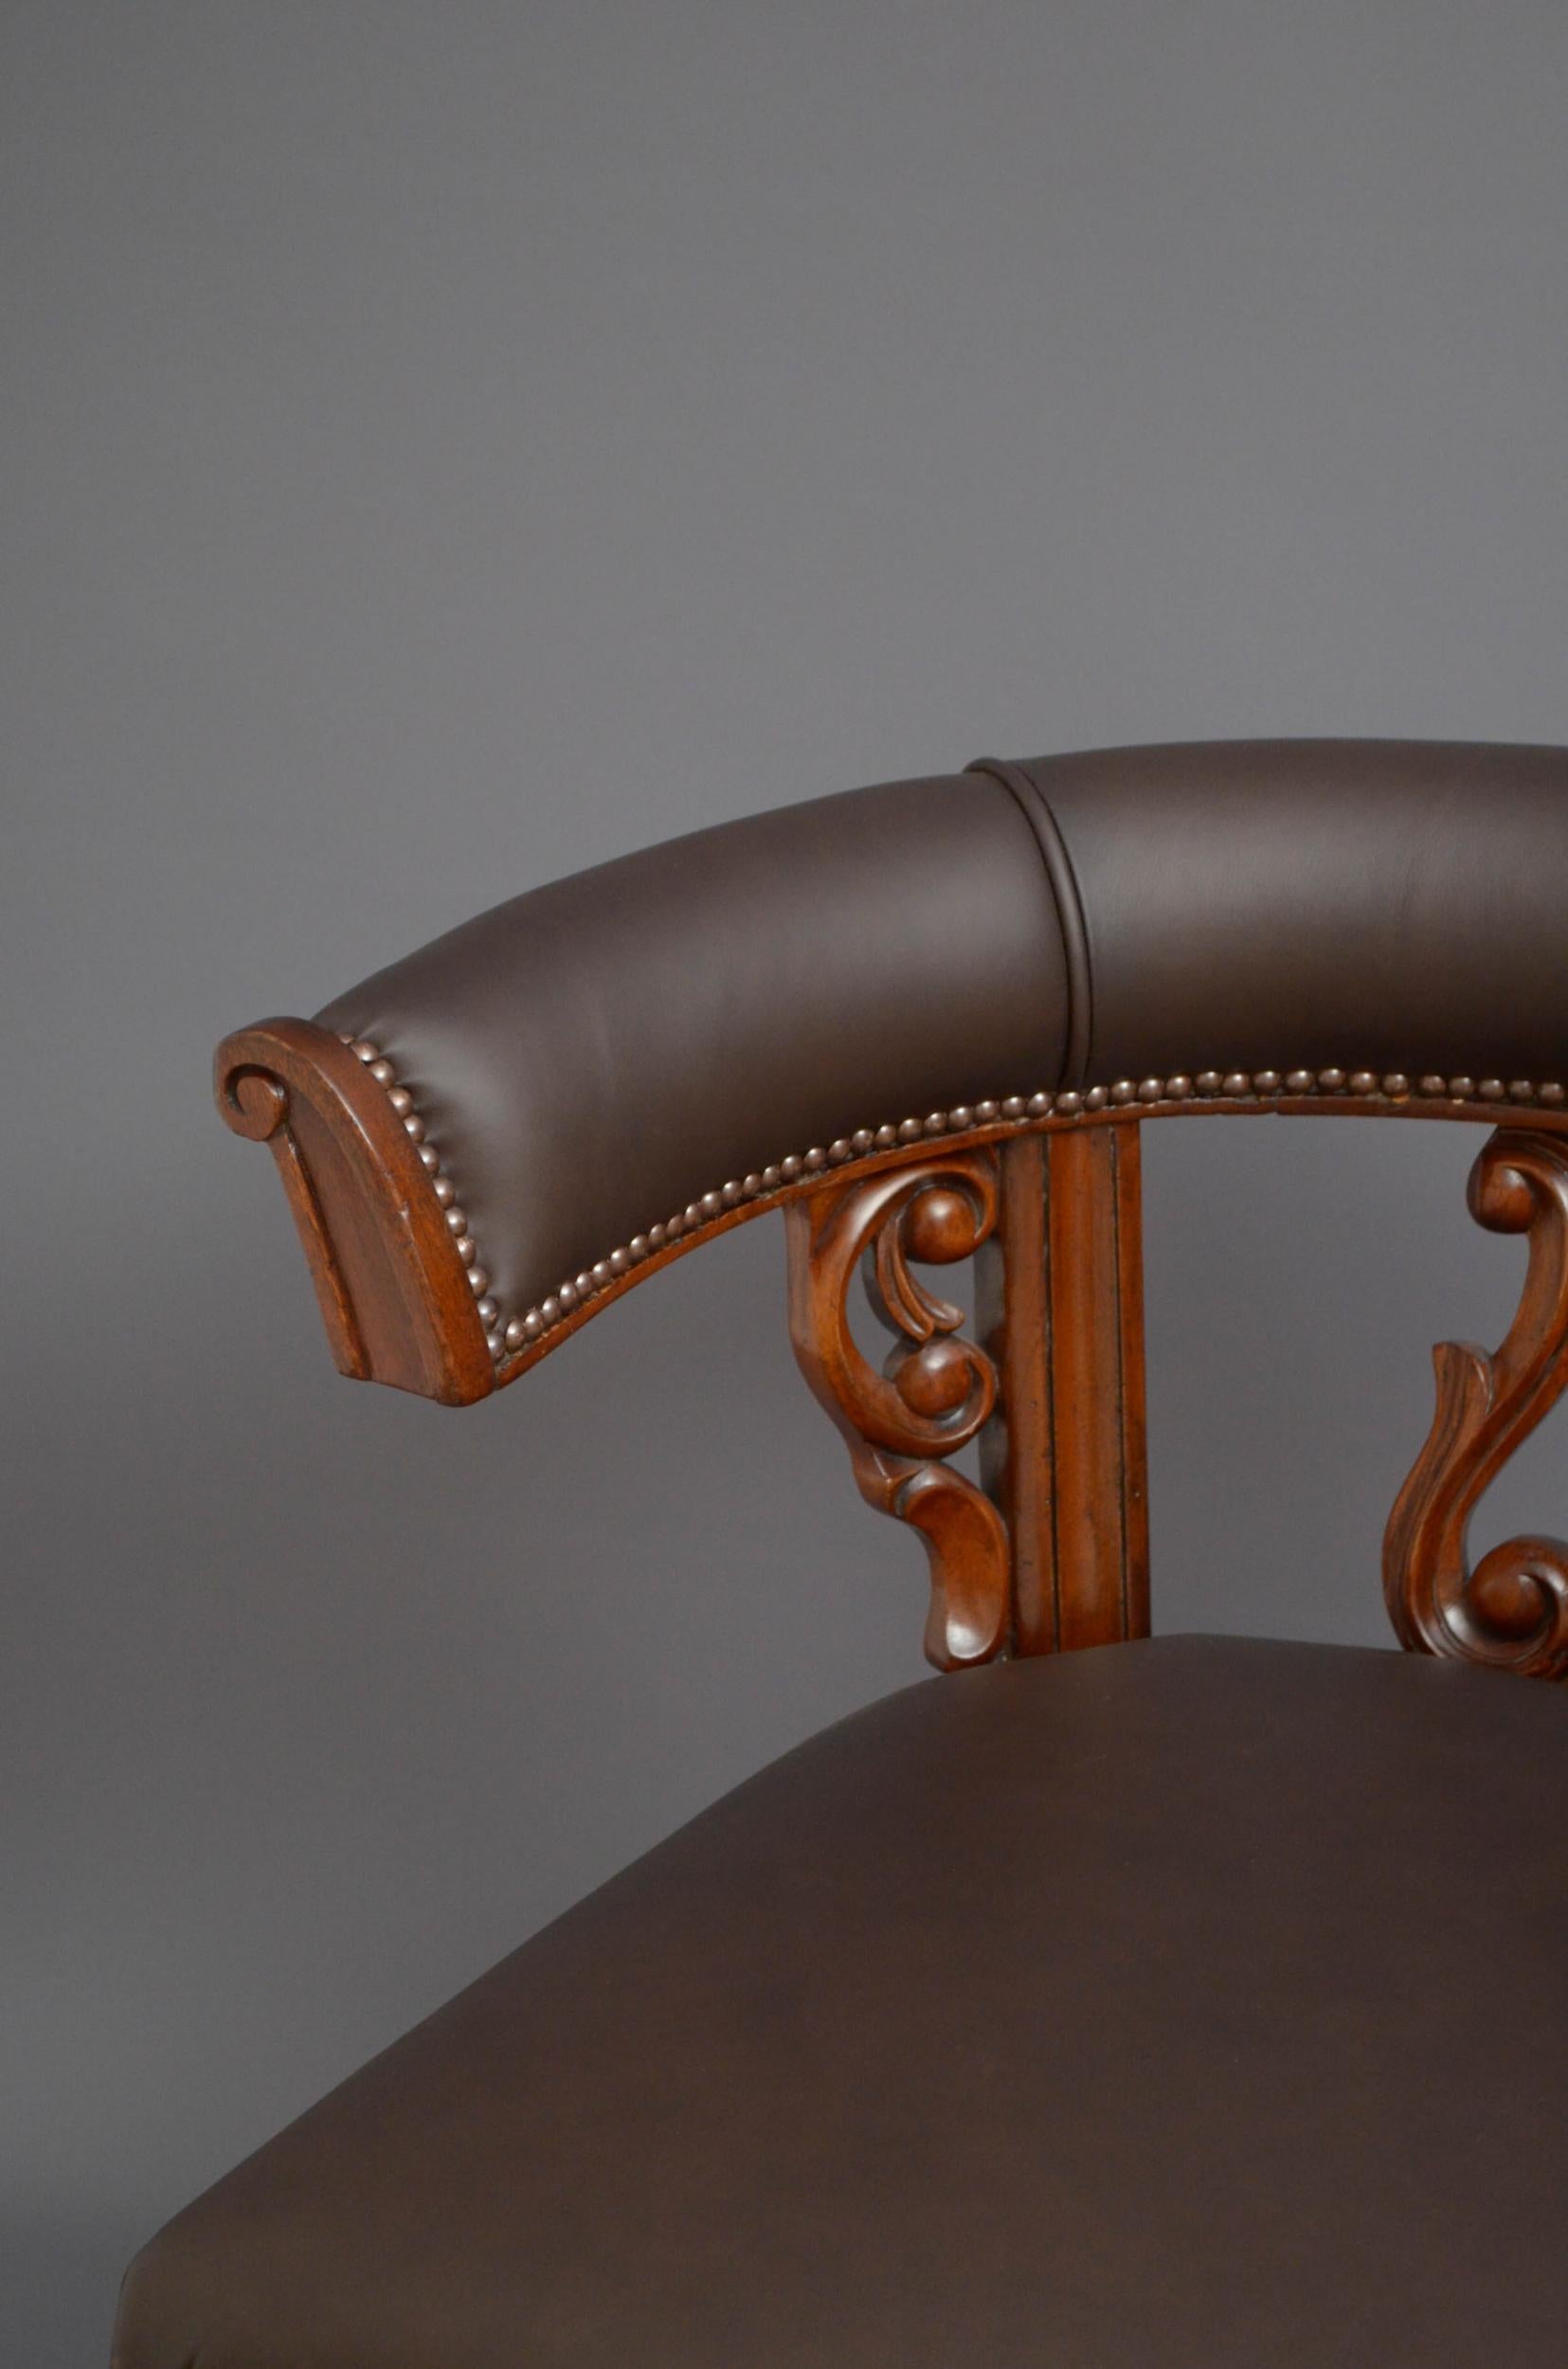 Sn4915, substantial Victorian desk chair or club chair, having brown leather, closely studded top rail supported on finely carved uprights above generous leather seat with closely studded edge, standing on turned, fluted legs terminating in original